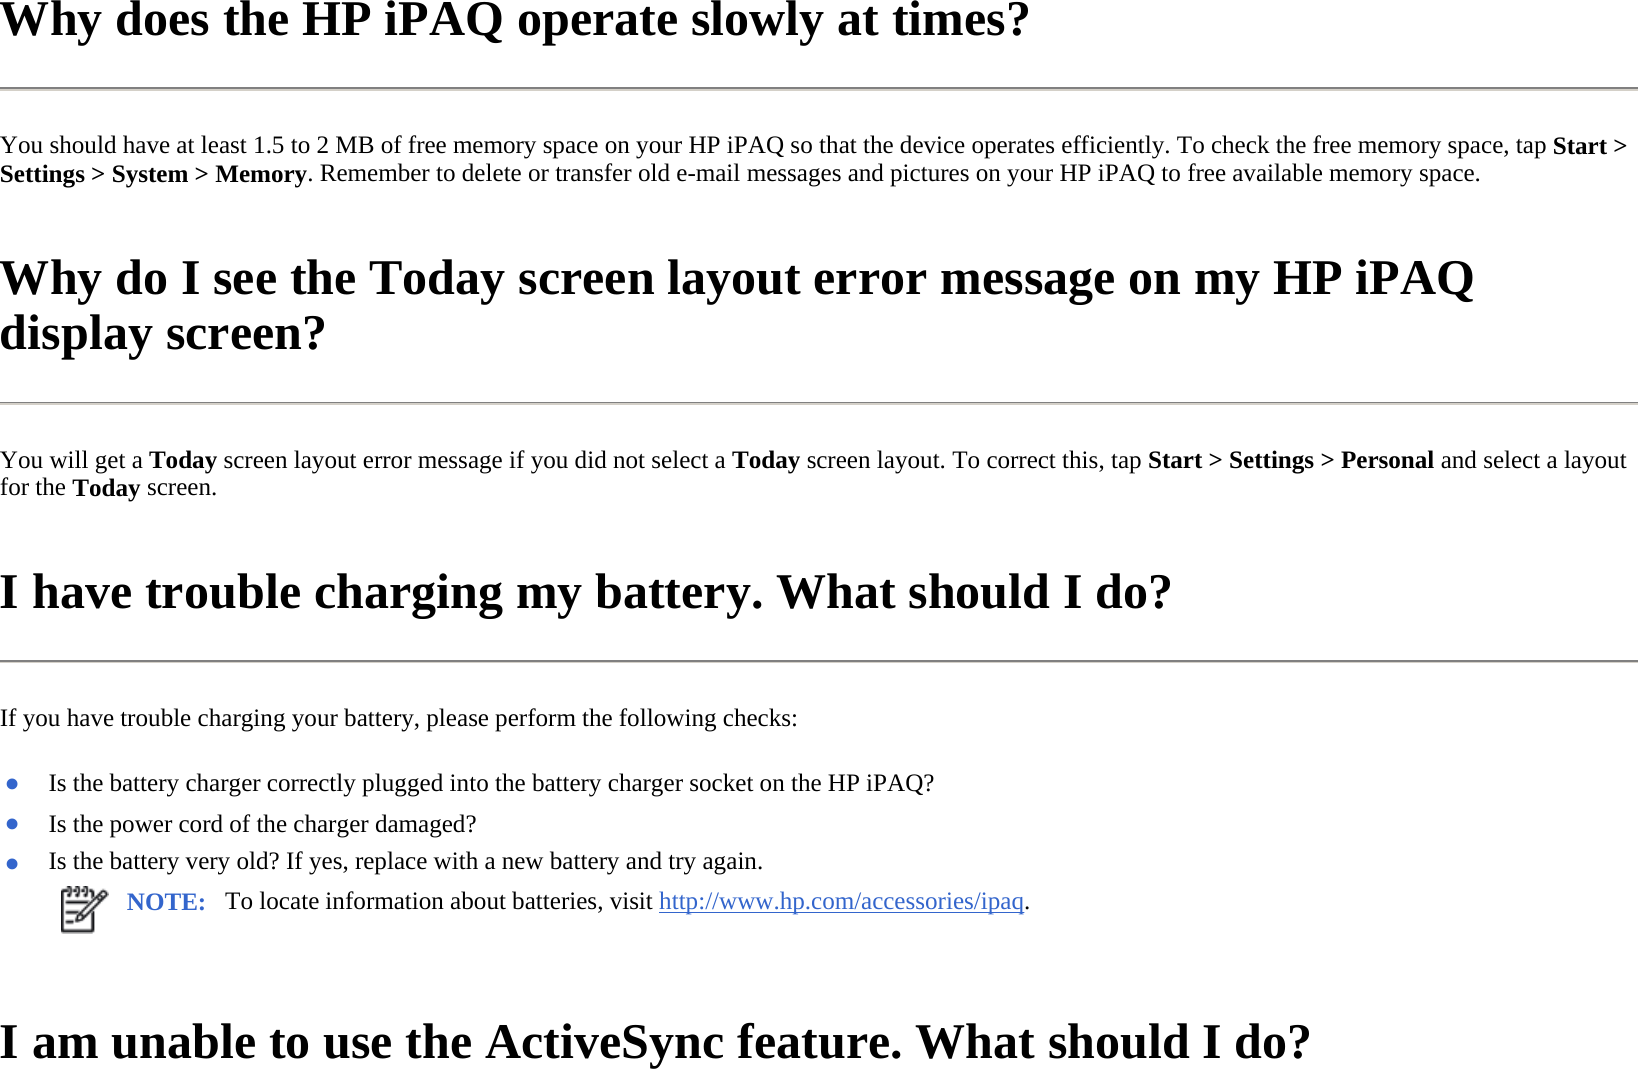 Why does the HP iPAQ operate slowly at times?  You should have at least 1.5 to 2 MB of free memory space on your HP iPAQ so that the device operates efficiently. To check the free memory space, tap Start &gt; Settings &gt; System &gt; Memory. Remember to delete or transfer old e-mail messages and pictures on your HP iPAQ to free available memory space.  Why do I see the Today screen layout error message on my HP iPAQ display screen?  You will get a Today screen layout error message if you did not select a Today screen layout. To correct this, tap Start &gt; Settings &gt; Personal and select a layout for the Today screen.  I have trouble charging my battery. What should I do?  If you have trouble charging your battery, please perform the following checks:  I am unable to use the ActiveSync feature. What should I do?  ●Is the battery charger correctly plugged into the battery charger socket on the HP iPAQ? ●Is the power cord of the charger damaged?●Is the battery very old? If yes, replace with a new battery and try again.NOTE: To locate information about batteries, visit http://www.hp.com/accessories/ipaq. 